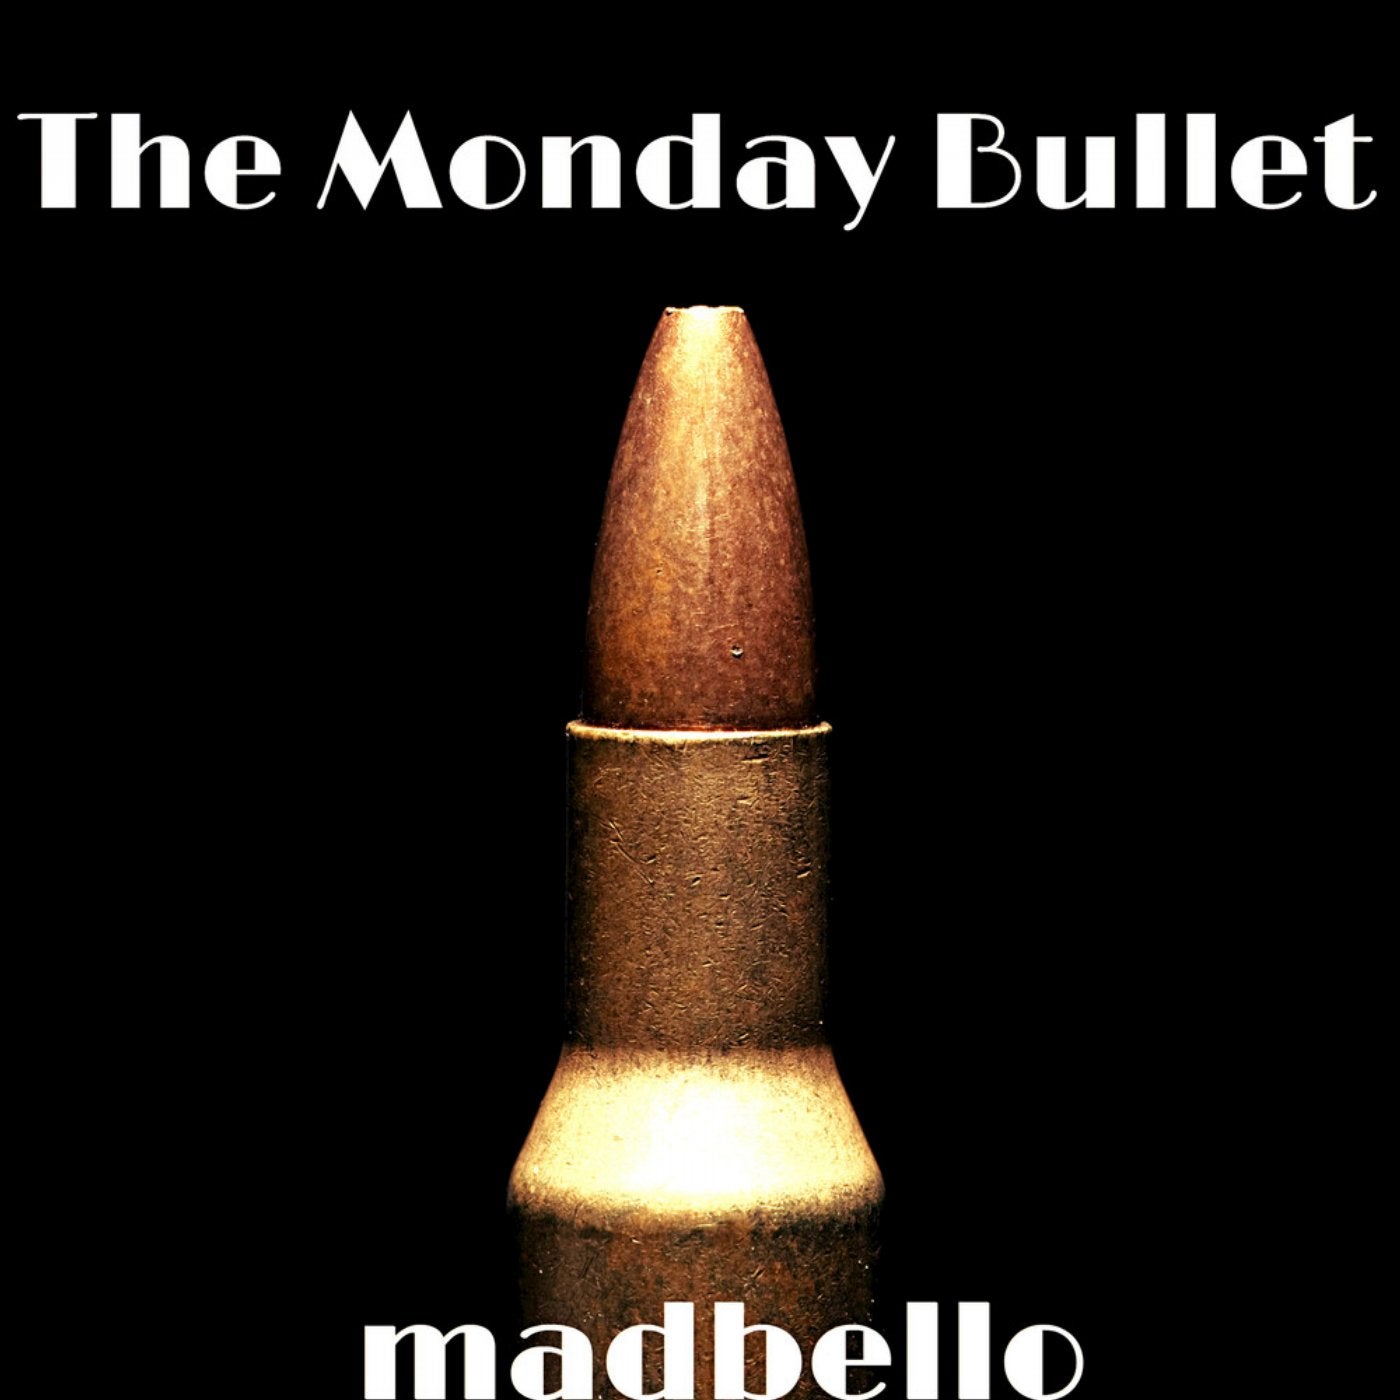 The Monday Bullet